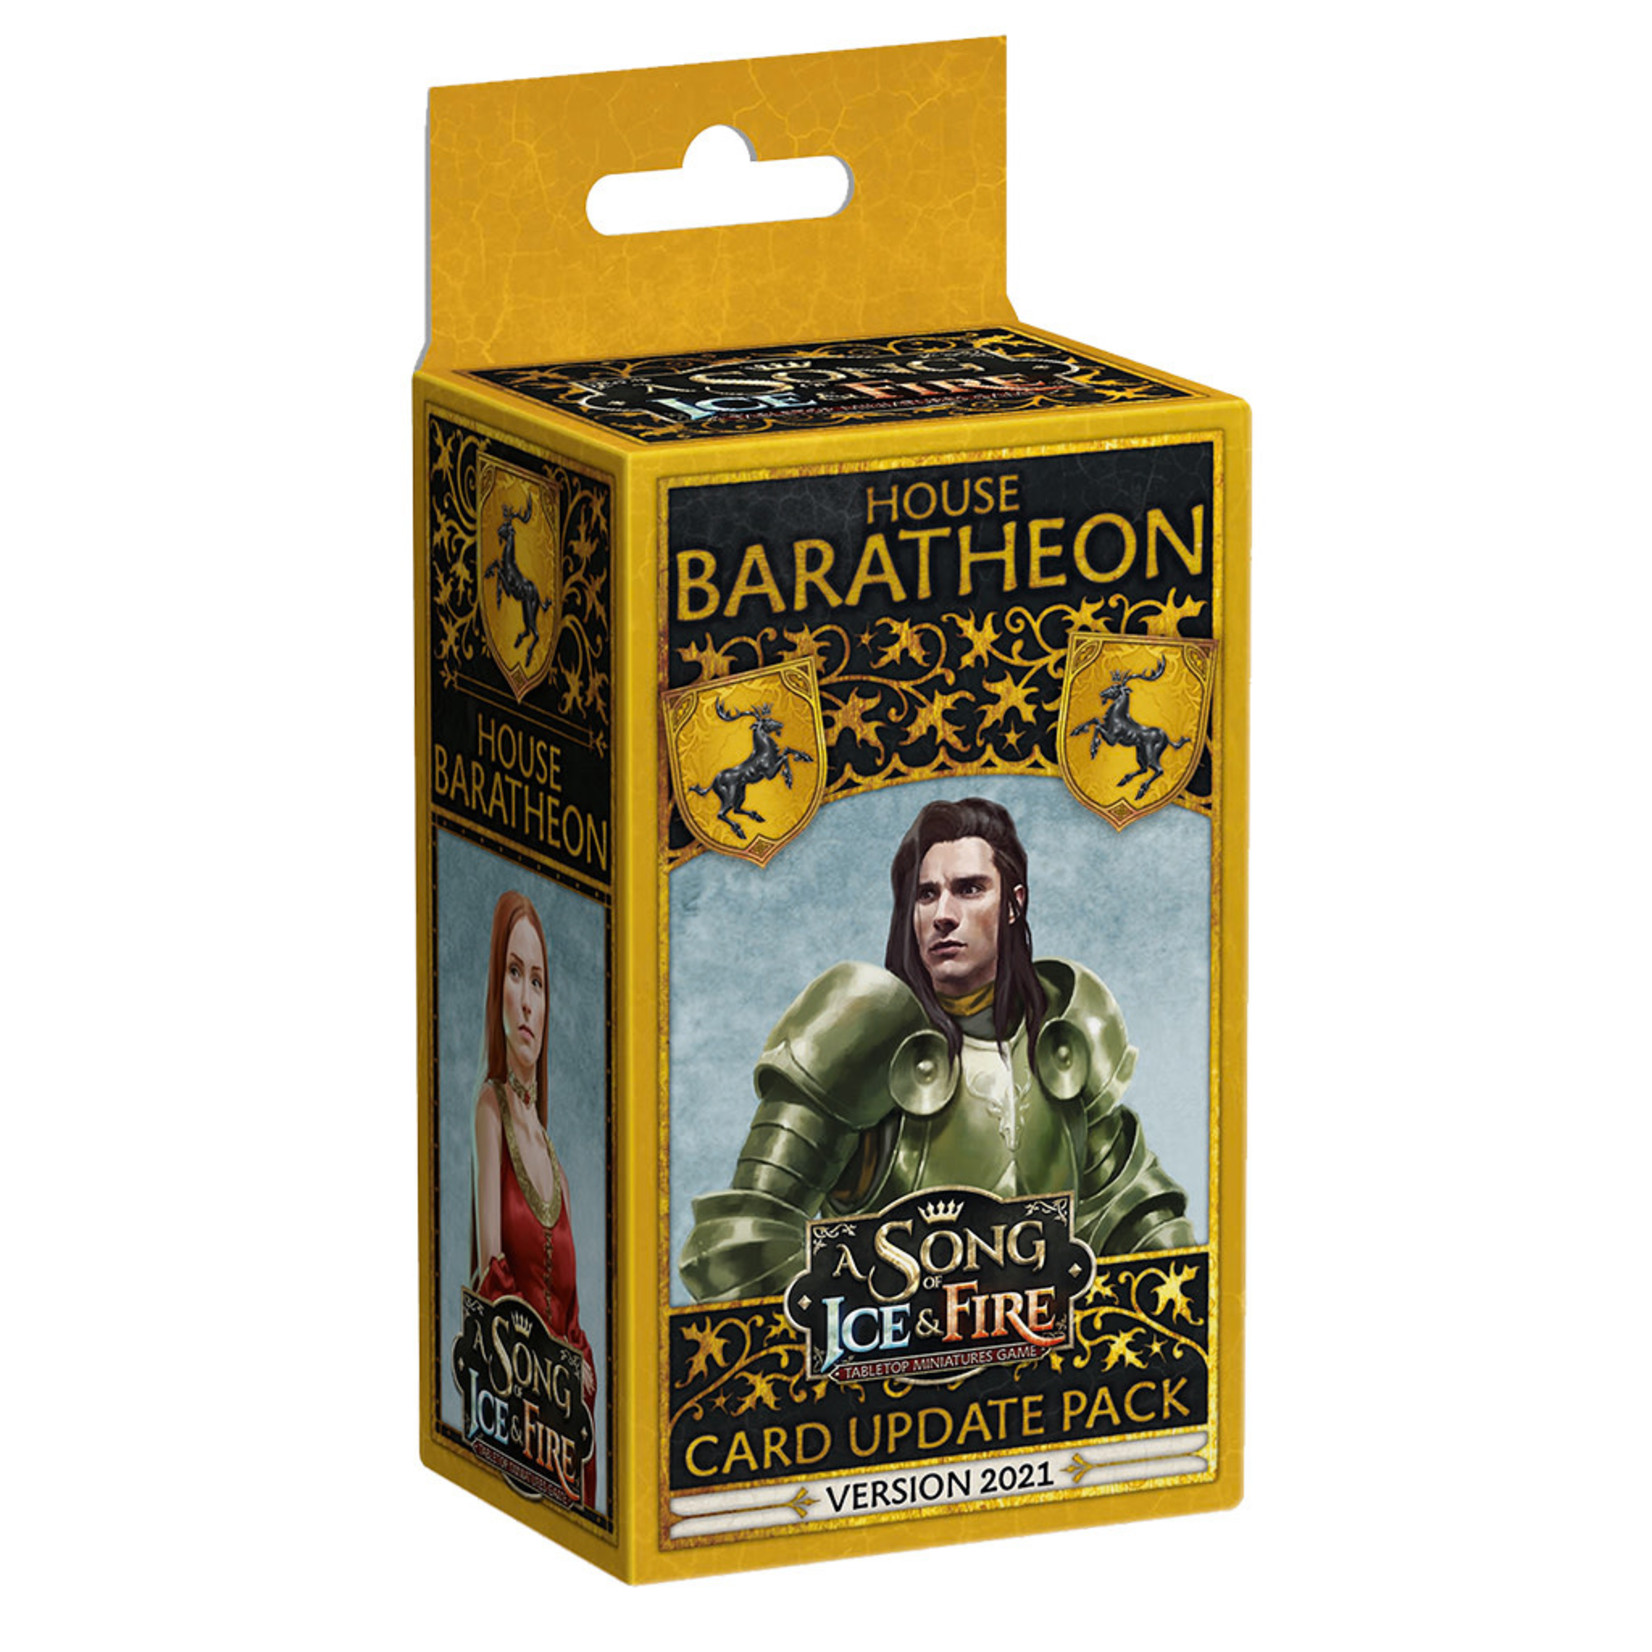 A Song of Ice and Fire House Baratheon Card Update Pack